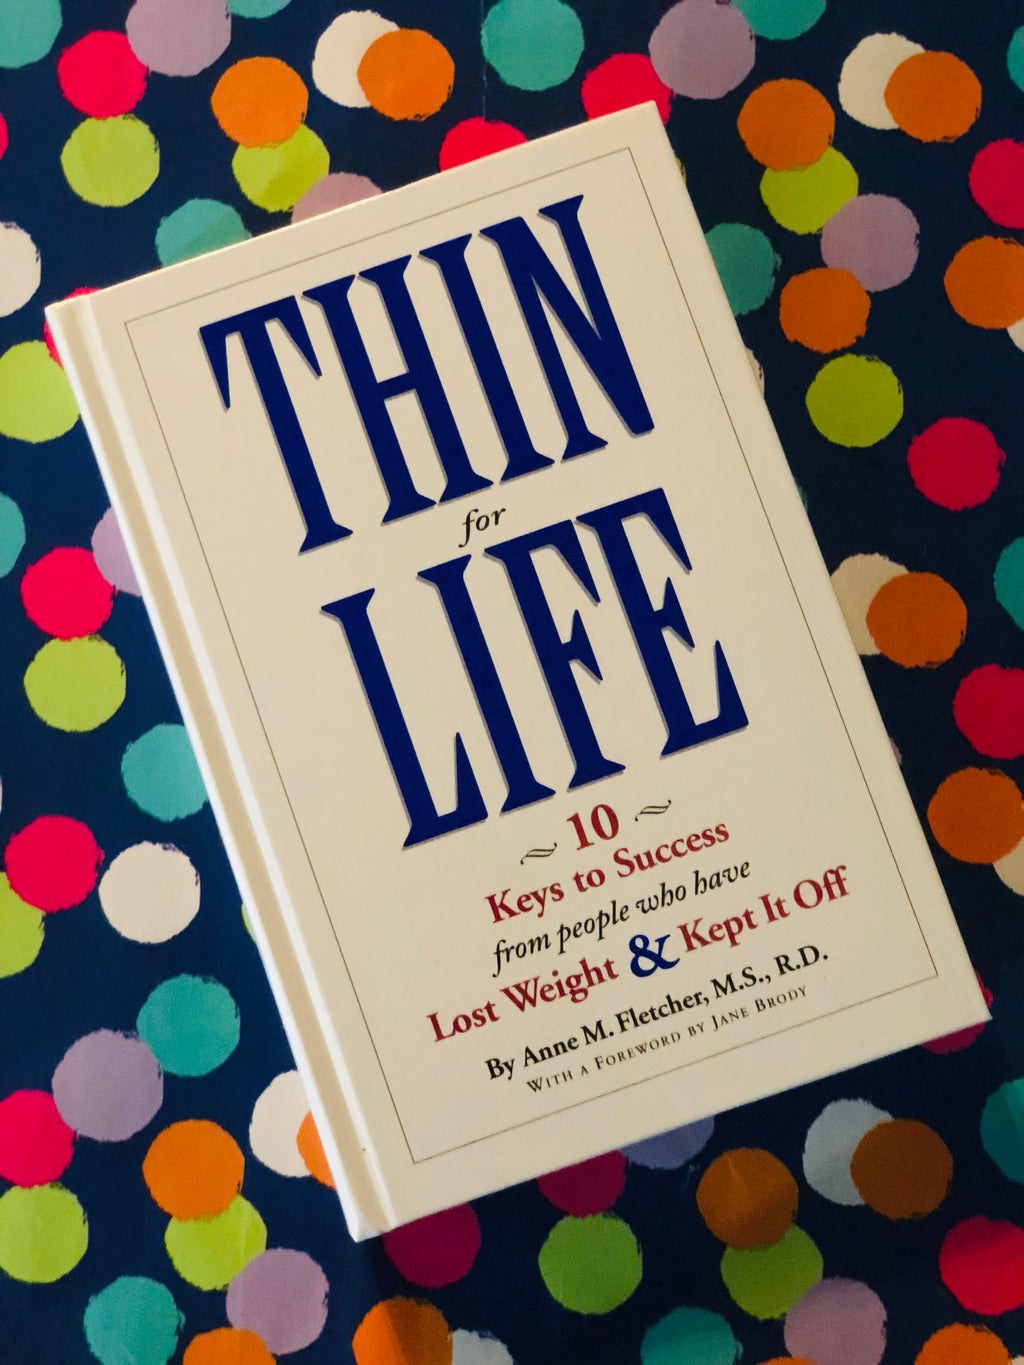 Thin for Life by Anne M. Fletcher, M.S., R.D